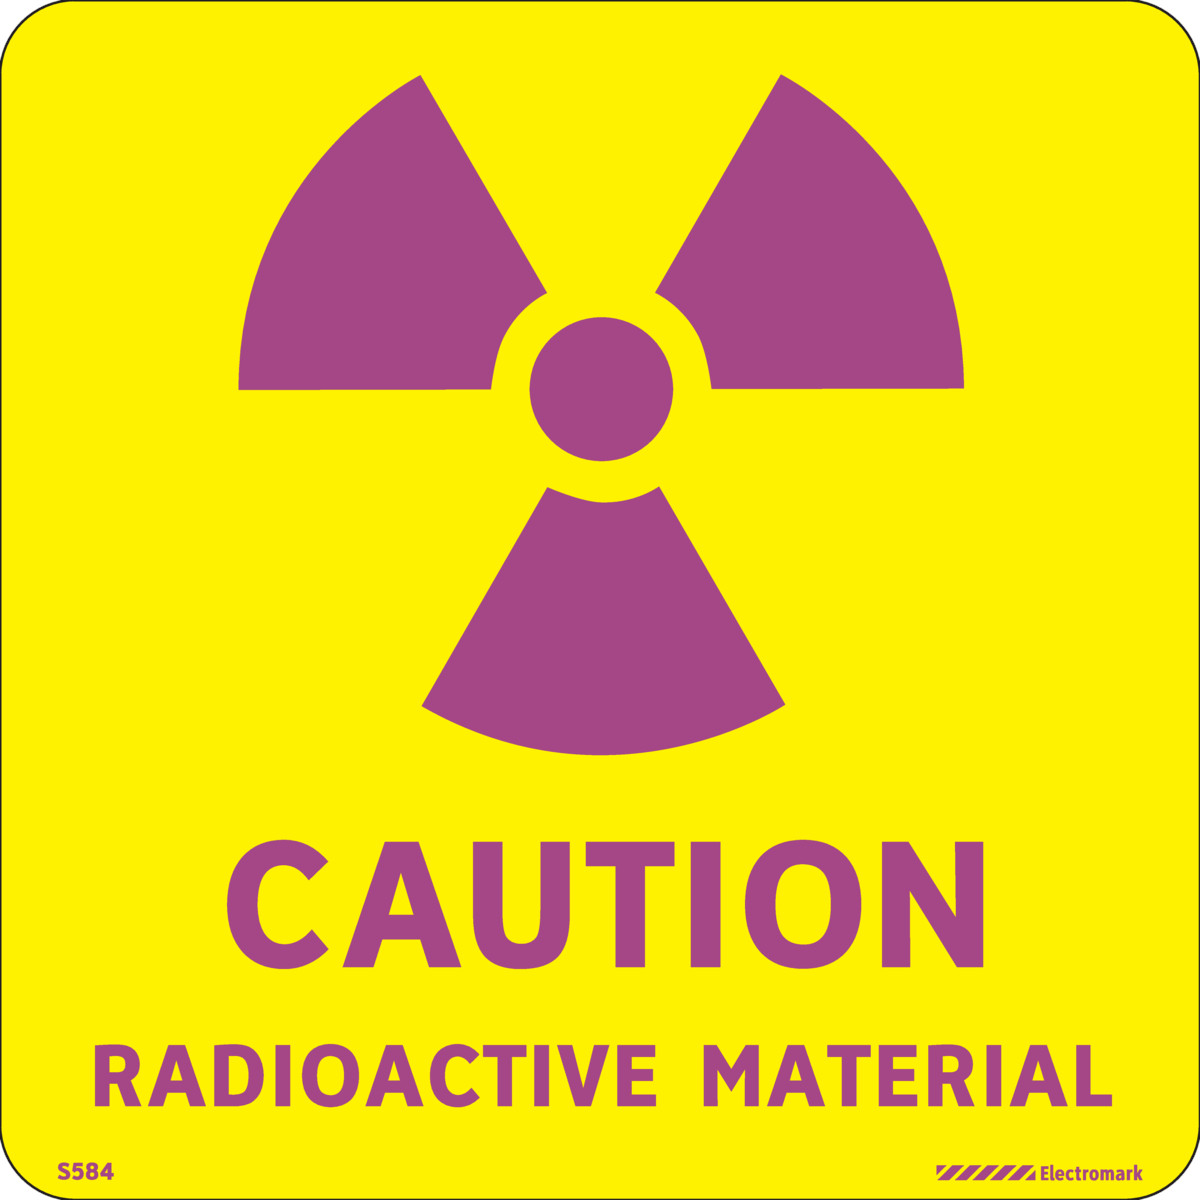 Caution Radioactive Material  Label -  4"h x 4"w